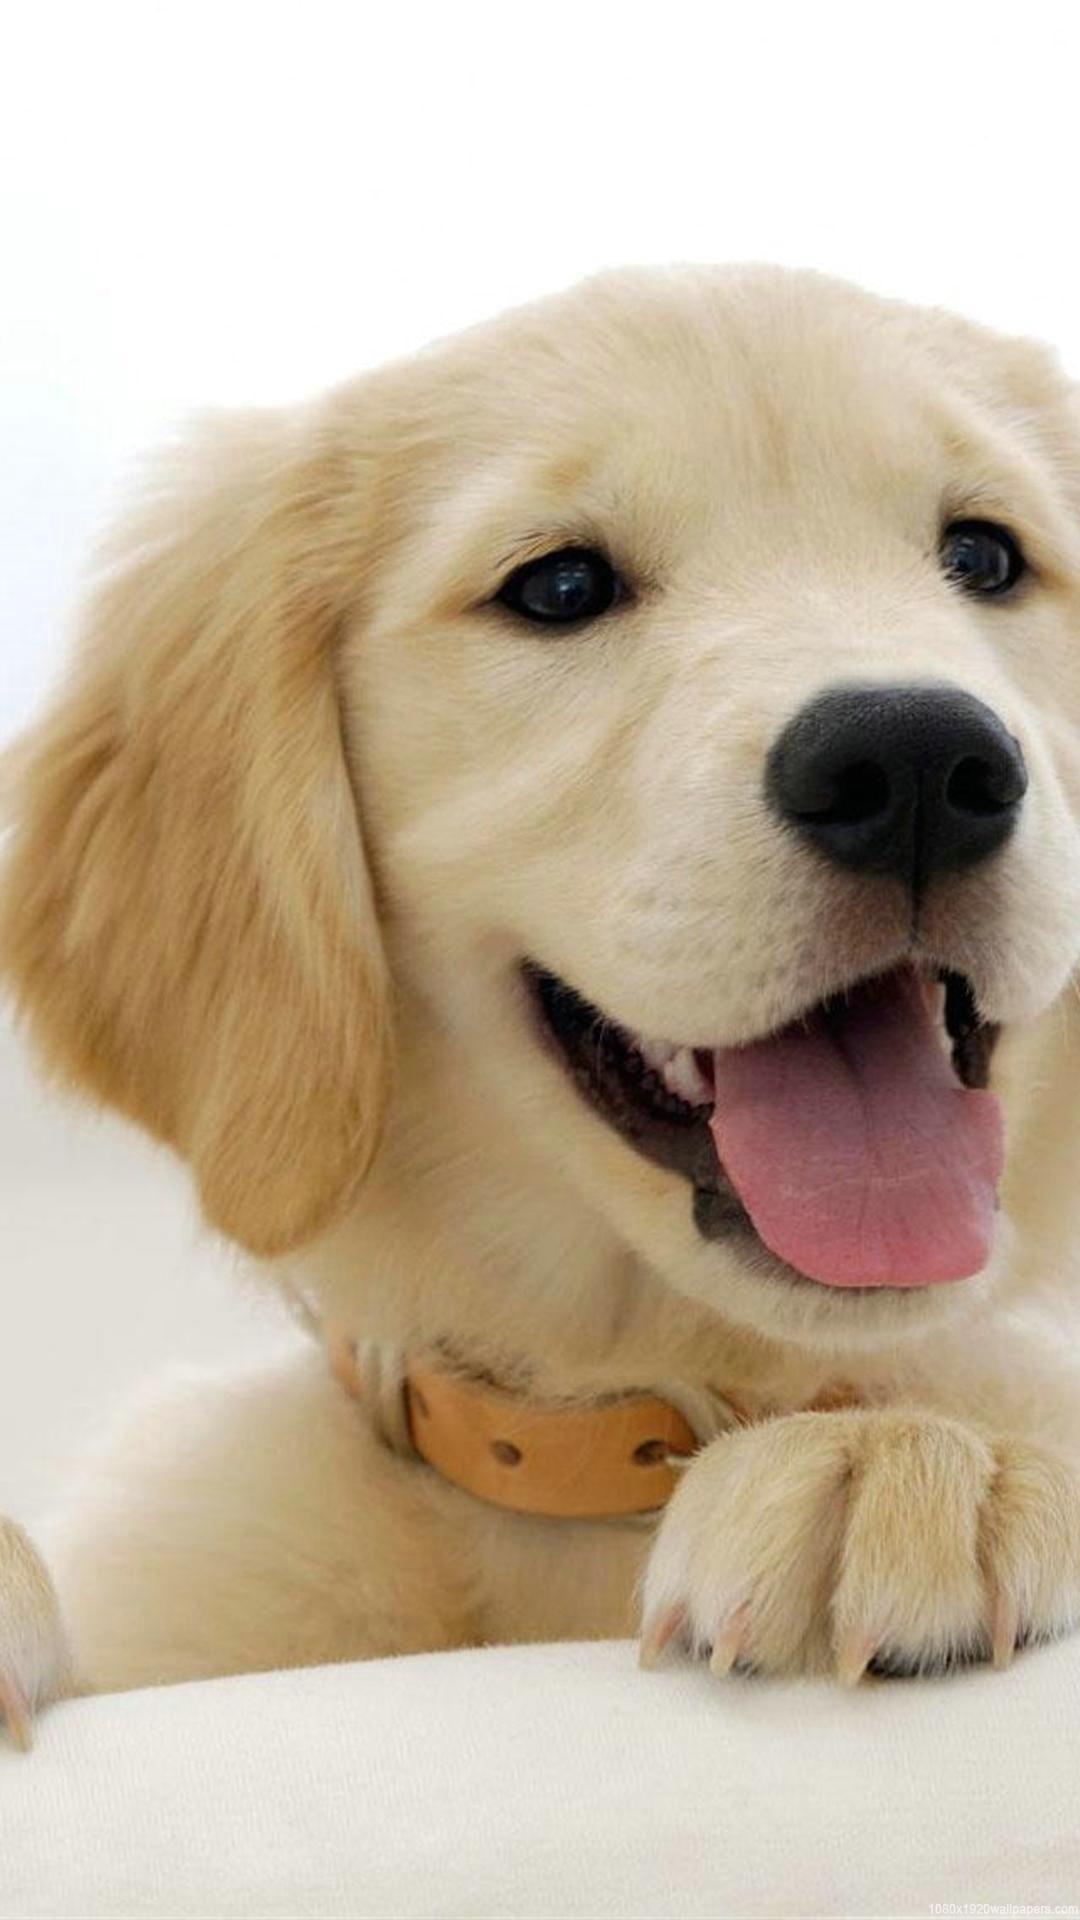 Dog Puppy Animal Wallpapers Hd - Dogs Wallpaper For Mobile , HD Wallpaper & Backgrounds